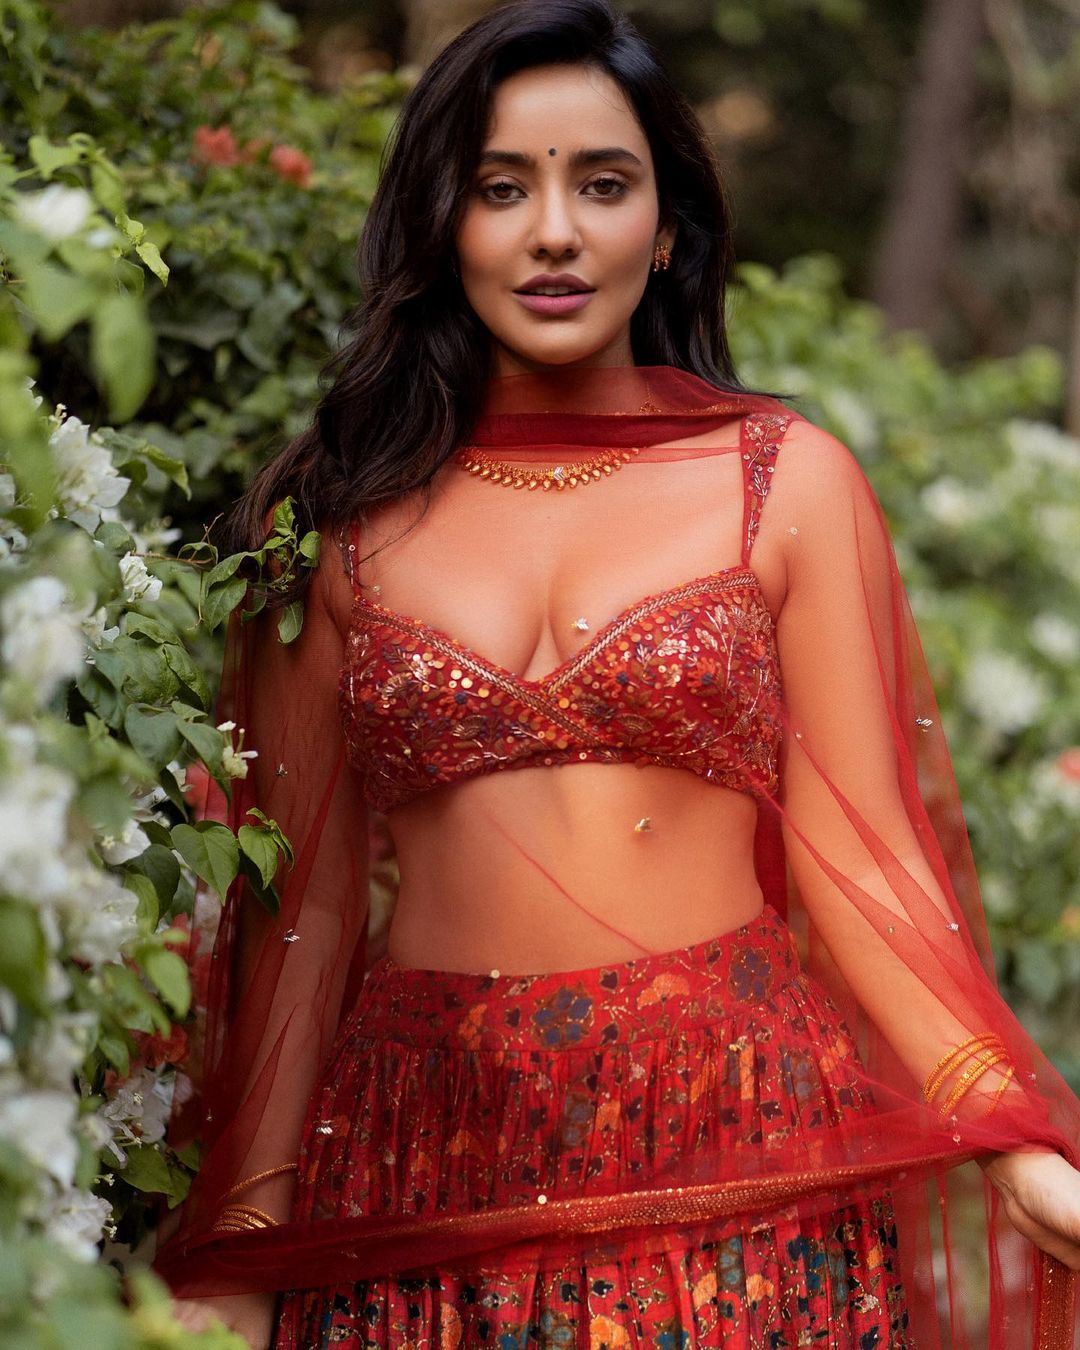 Neha Sharma shared pic in red lehanga looks beautiful in treditional outfit